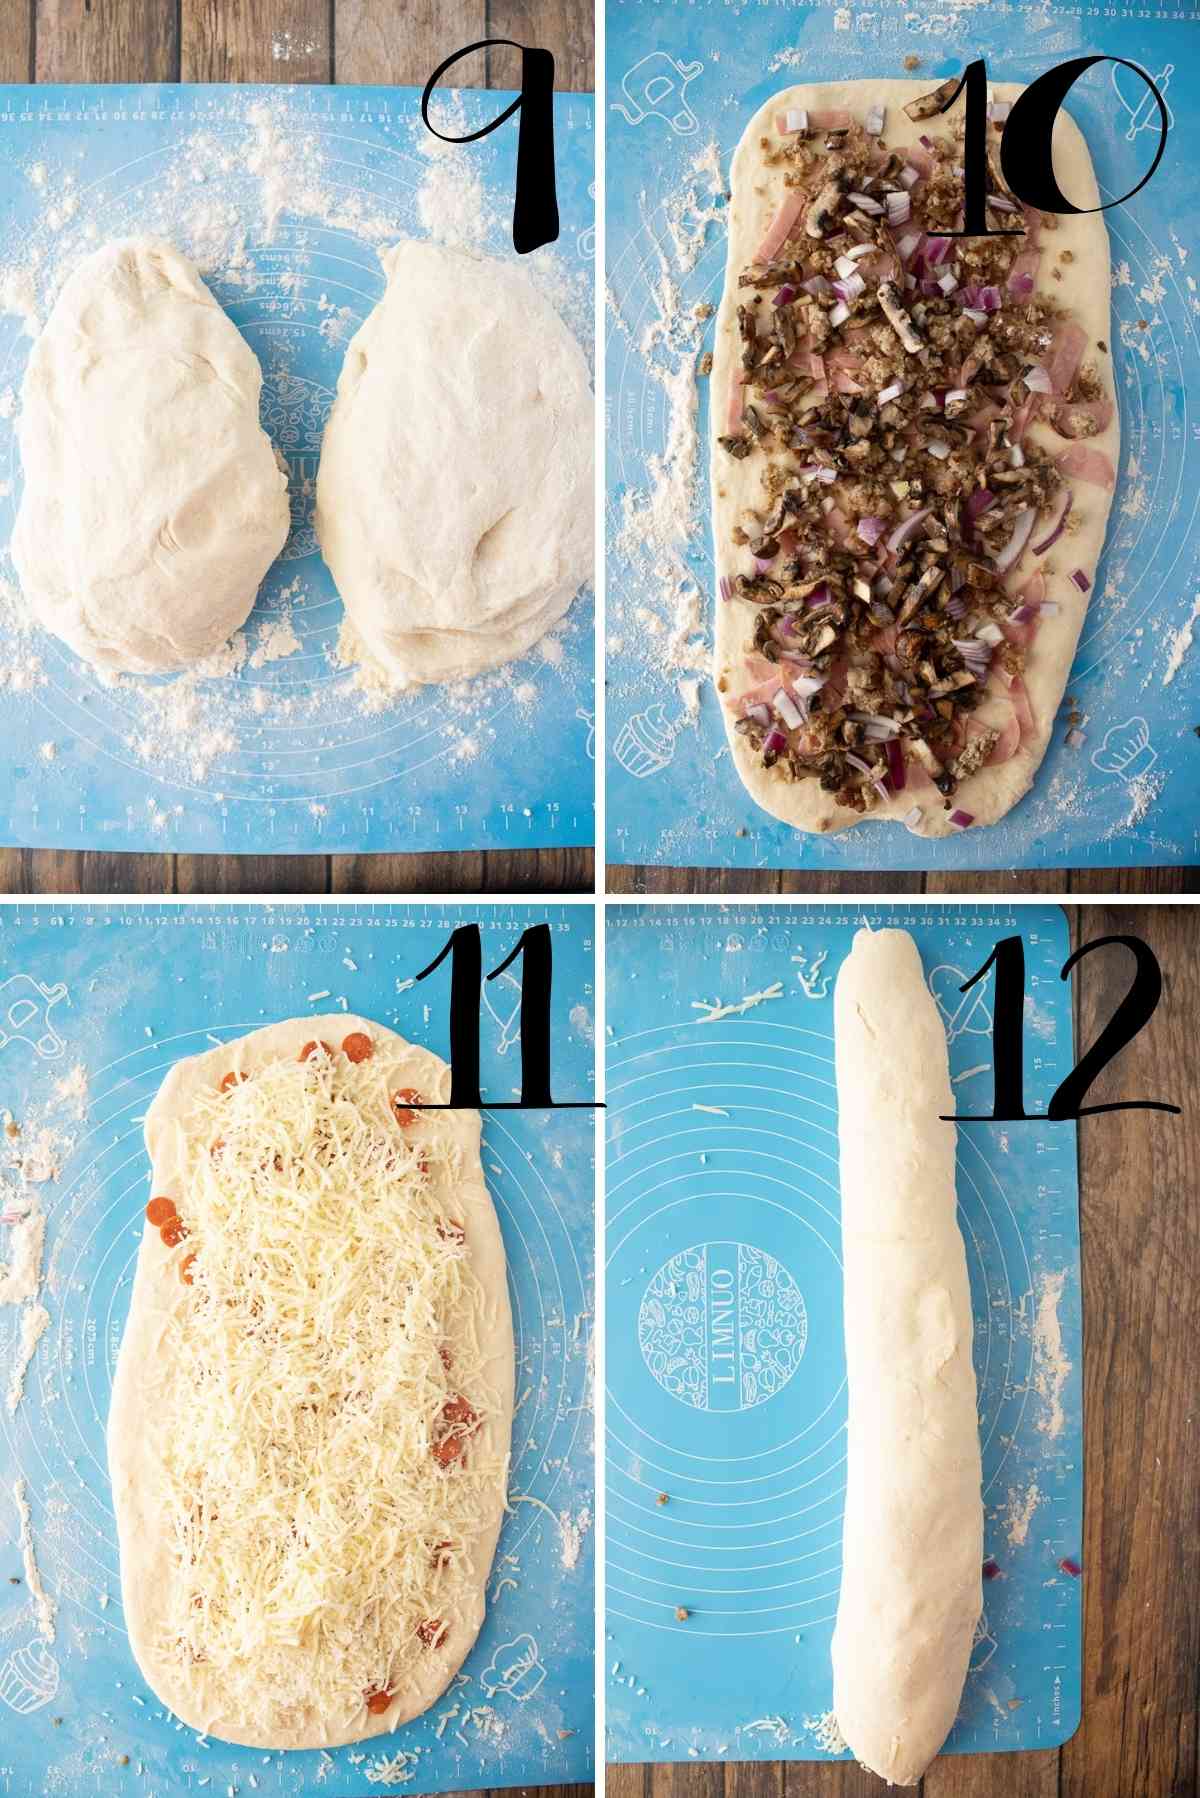 Divide dough, roll out, sprinkle with toppings and roll up.